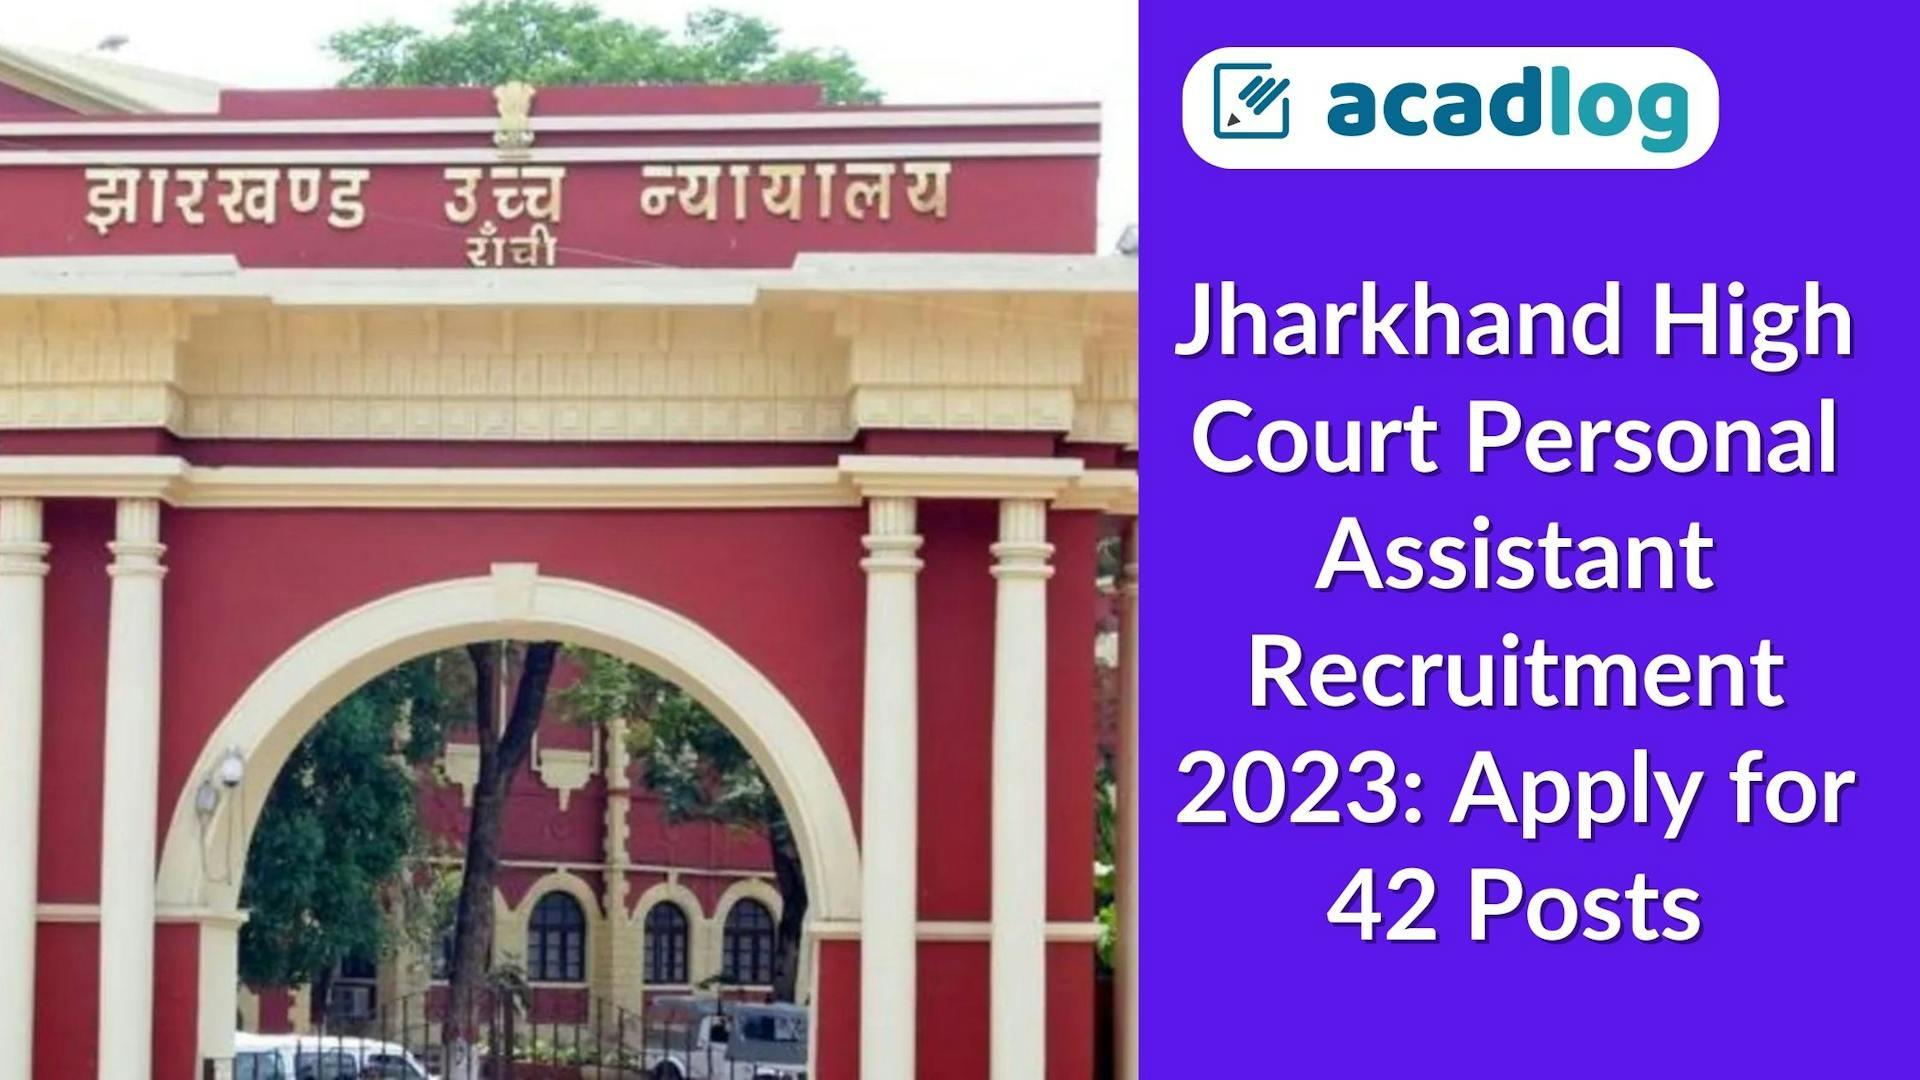 Jharkhand High Court Personal Assistant Recruitment 2023: Apply for 42 Posts